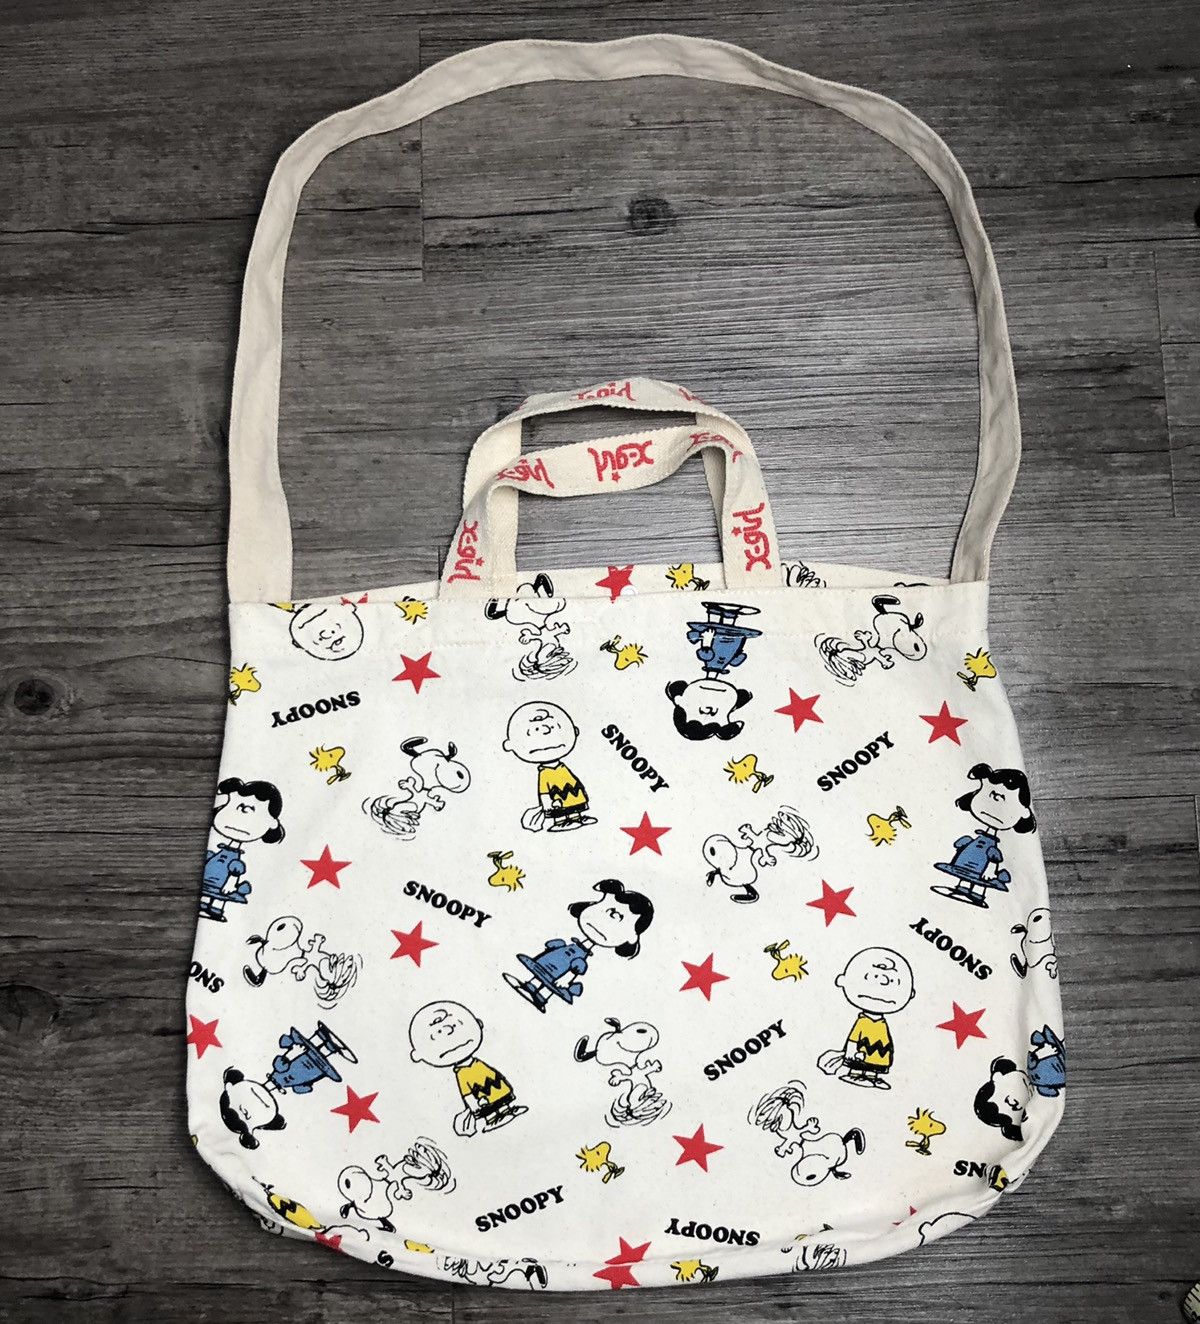 Vintage Peanuts x xgirl snoopy tote bag Size ONE SIZE - 2 Preview